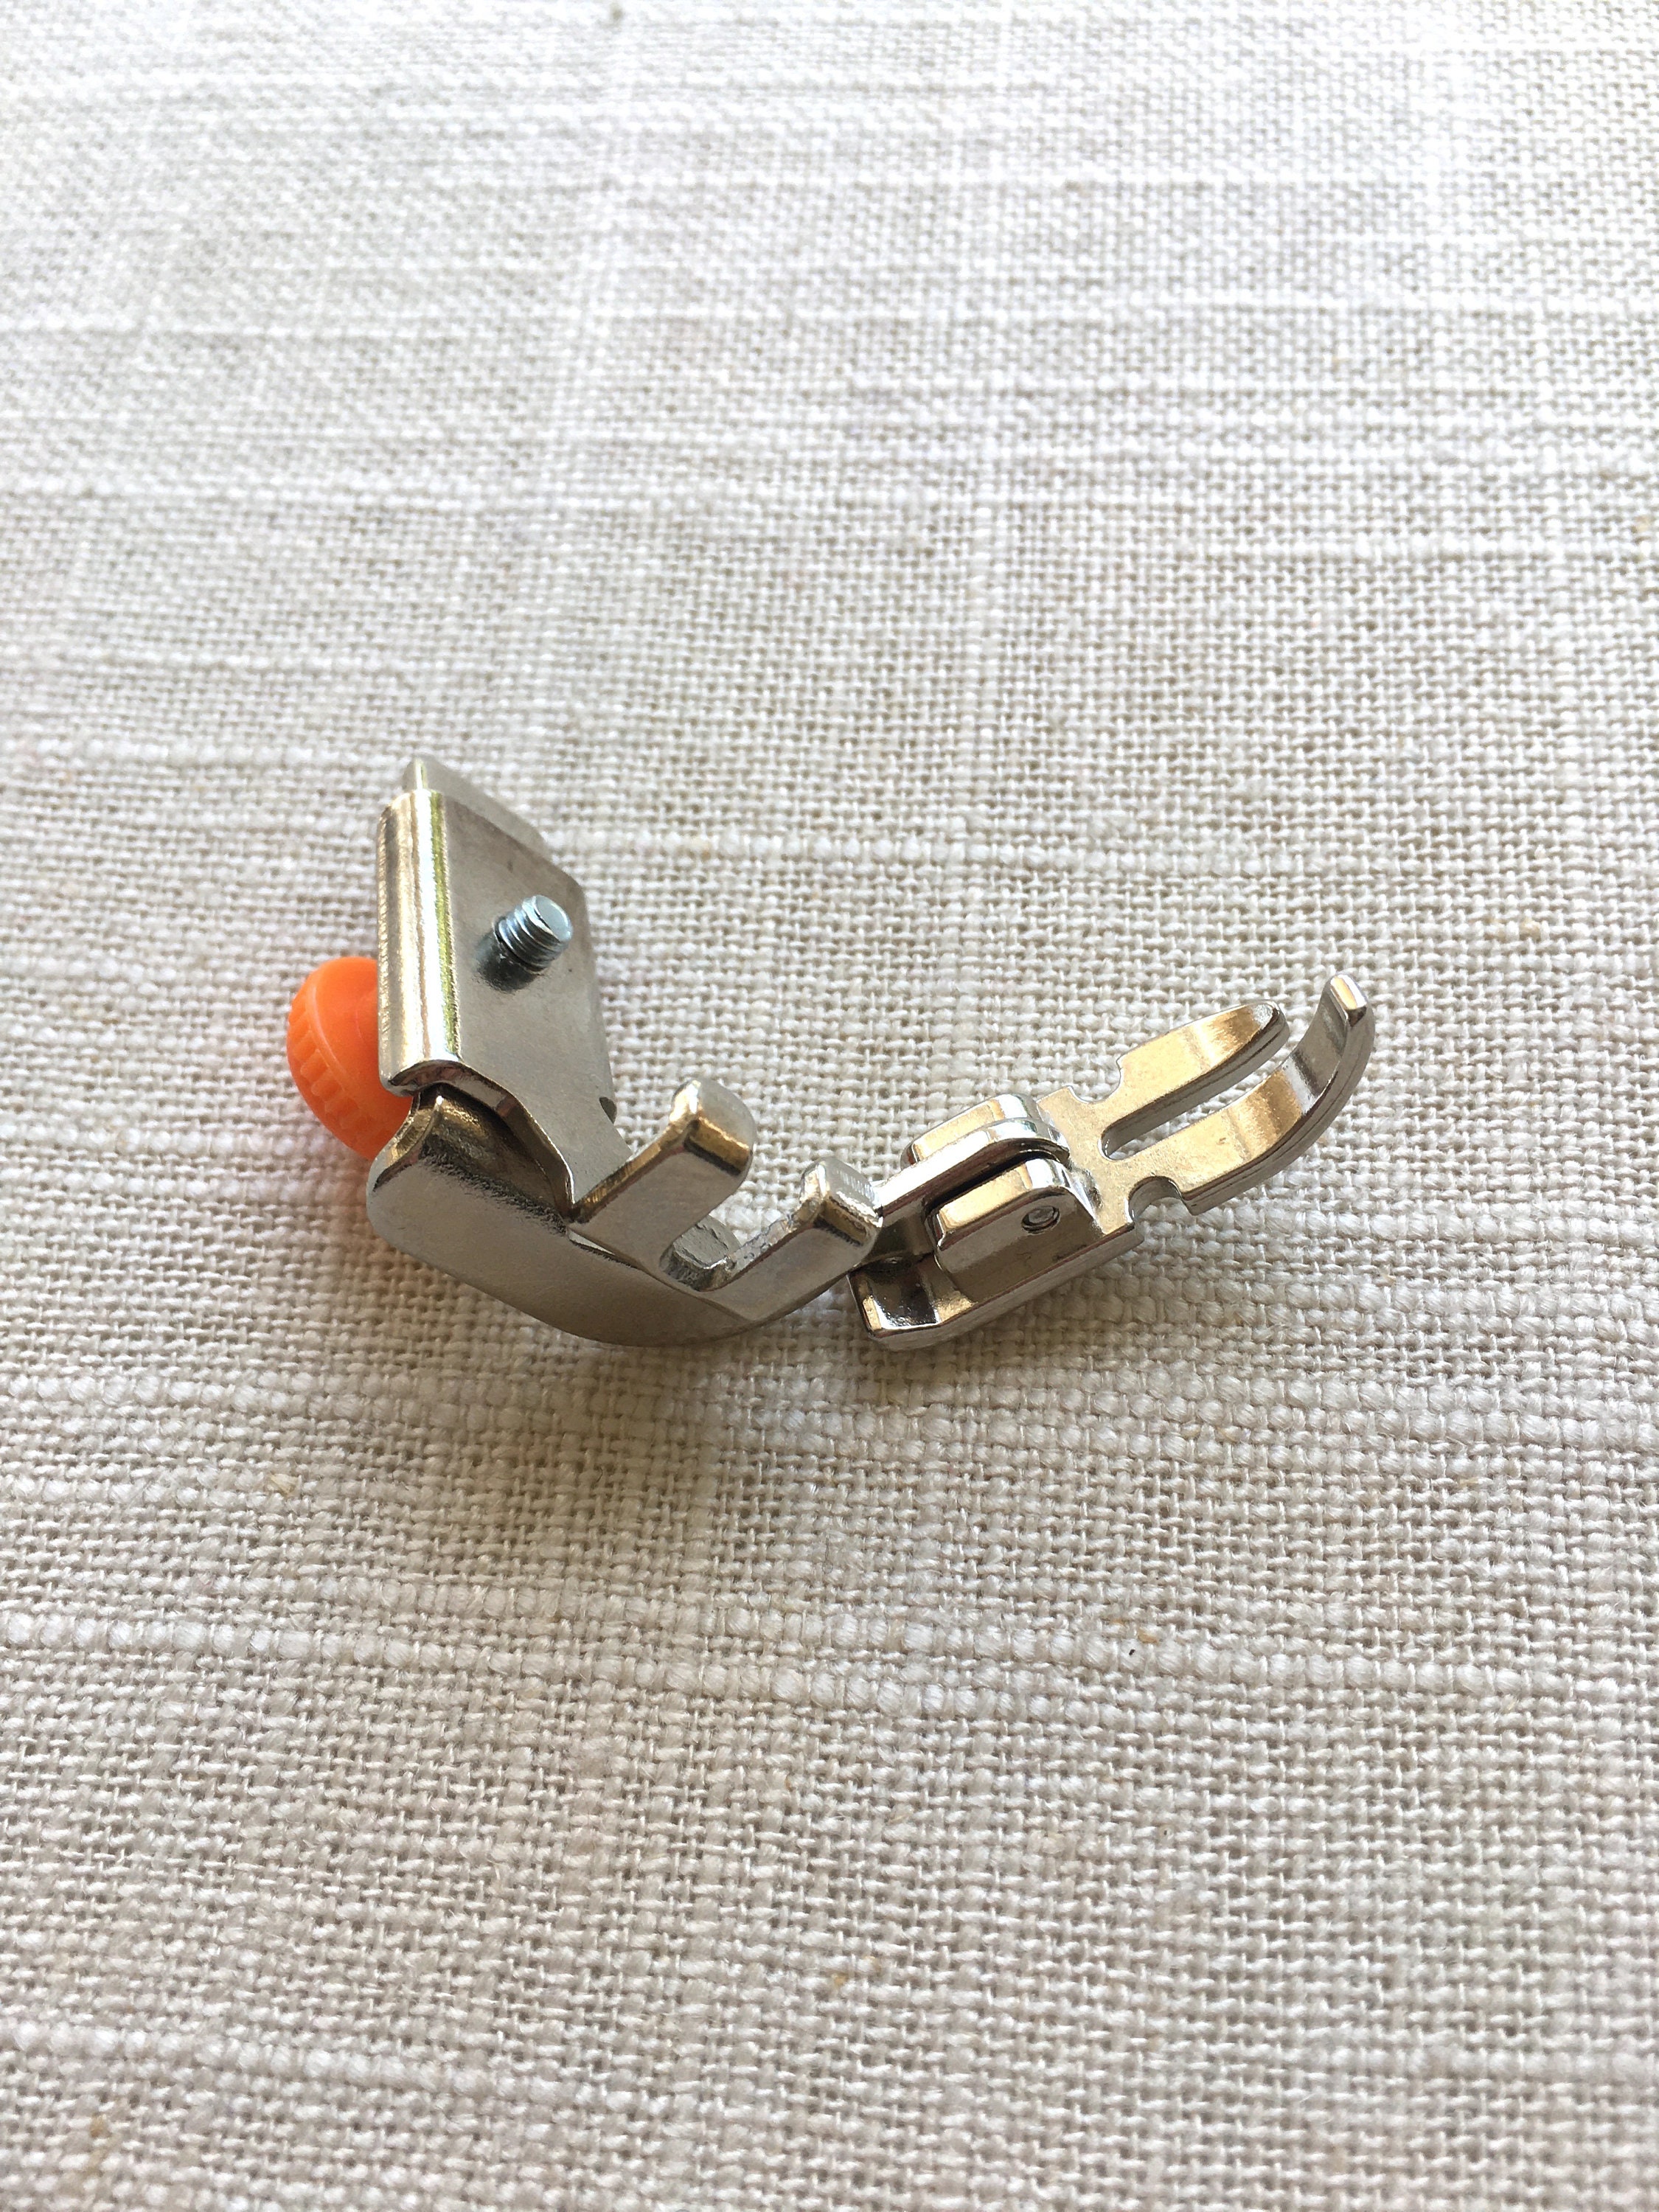 Zipper Foot Short Shank Side Mounting for some Singer Sewing Machines